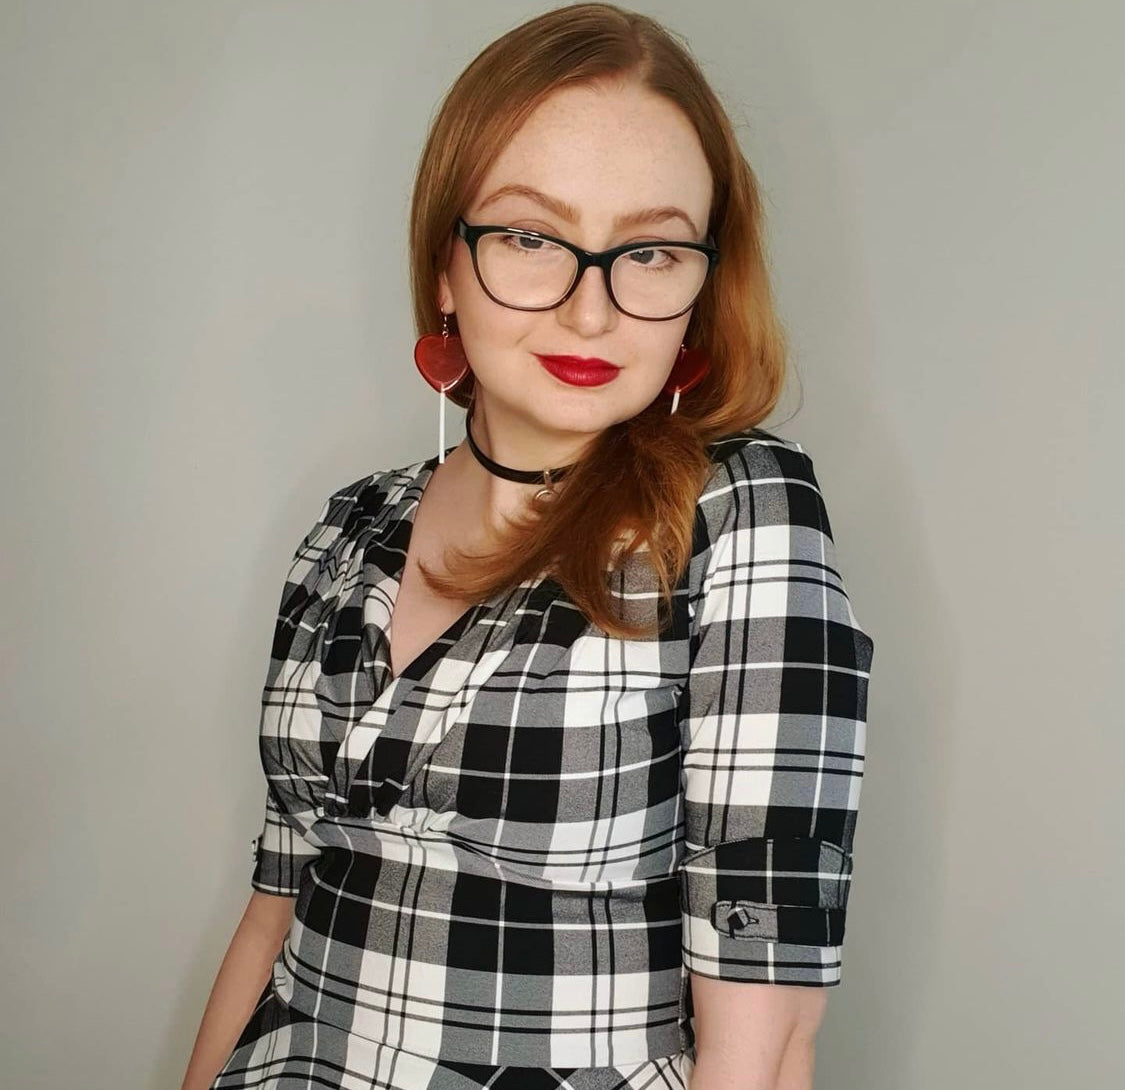 Interview with Aoife Murray - Peer Kink Educator